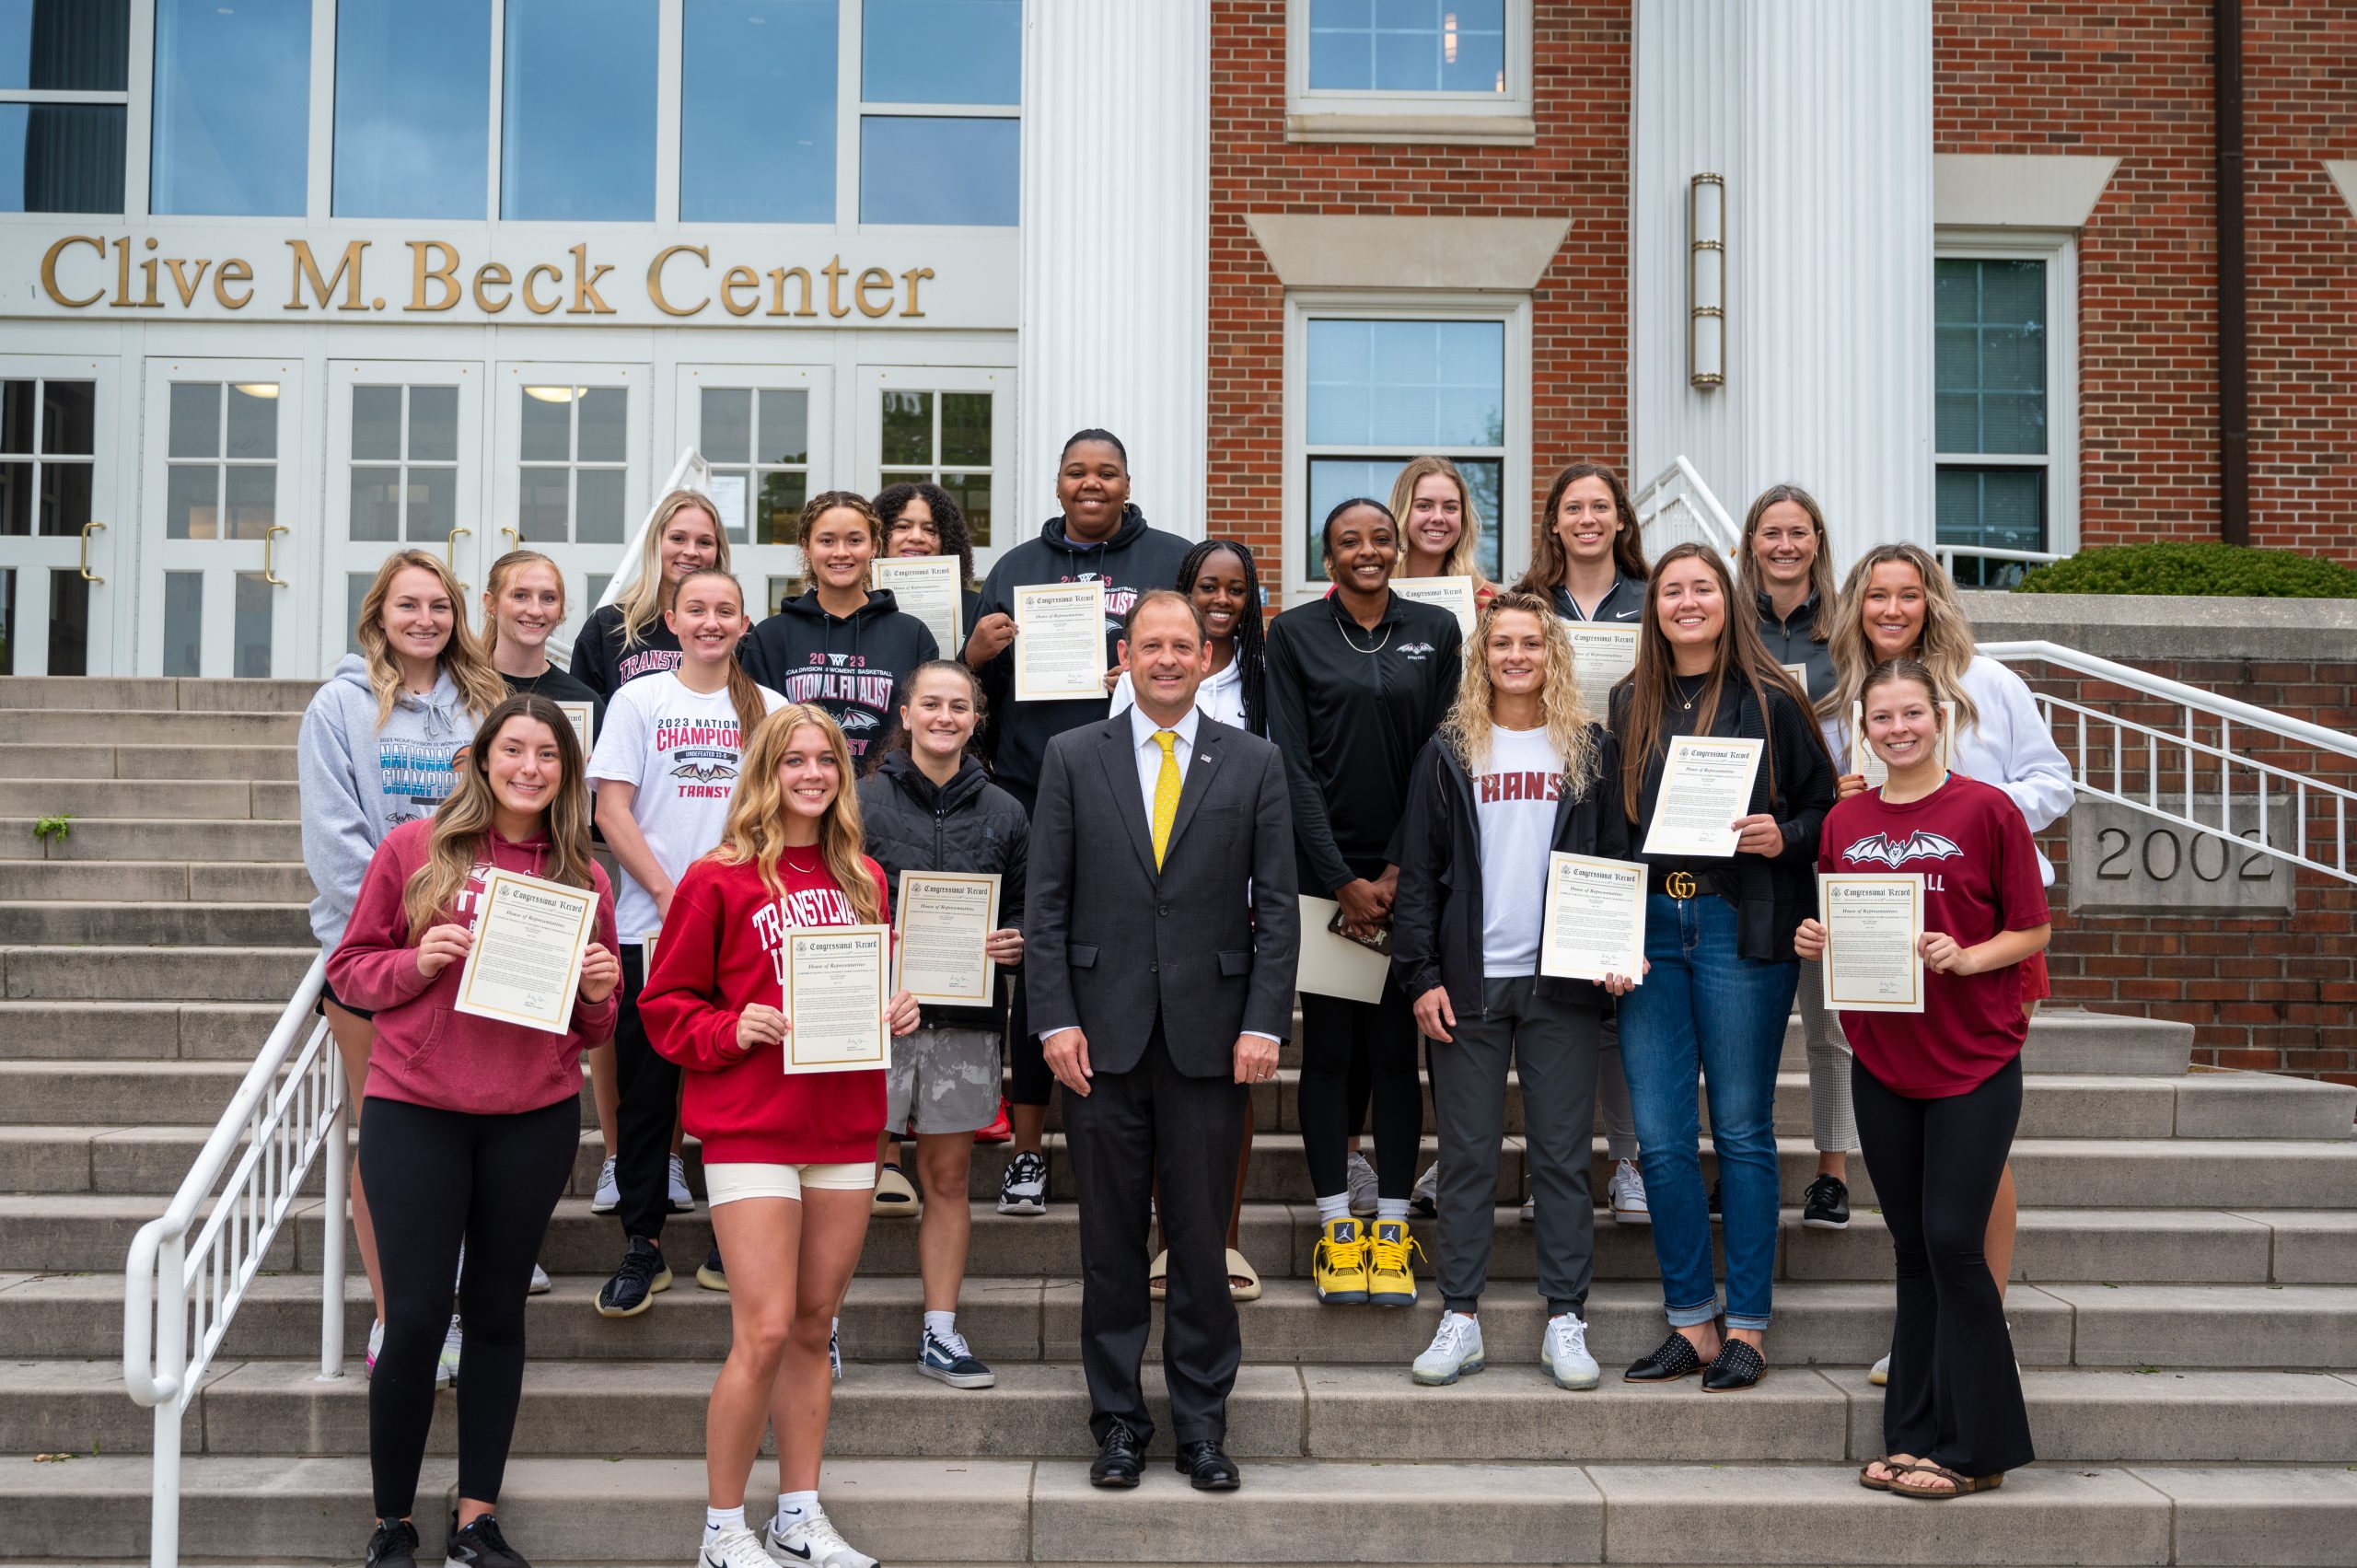 Transylvania women’s basketball national champions recognized by Congressman Andy Barr